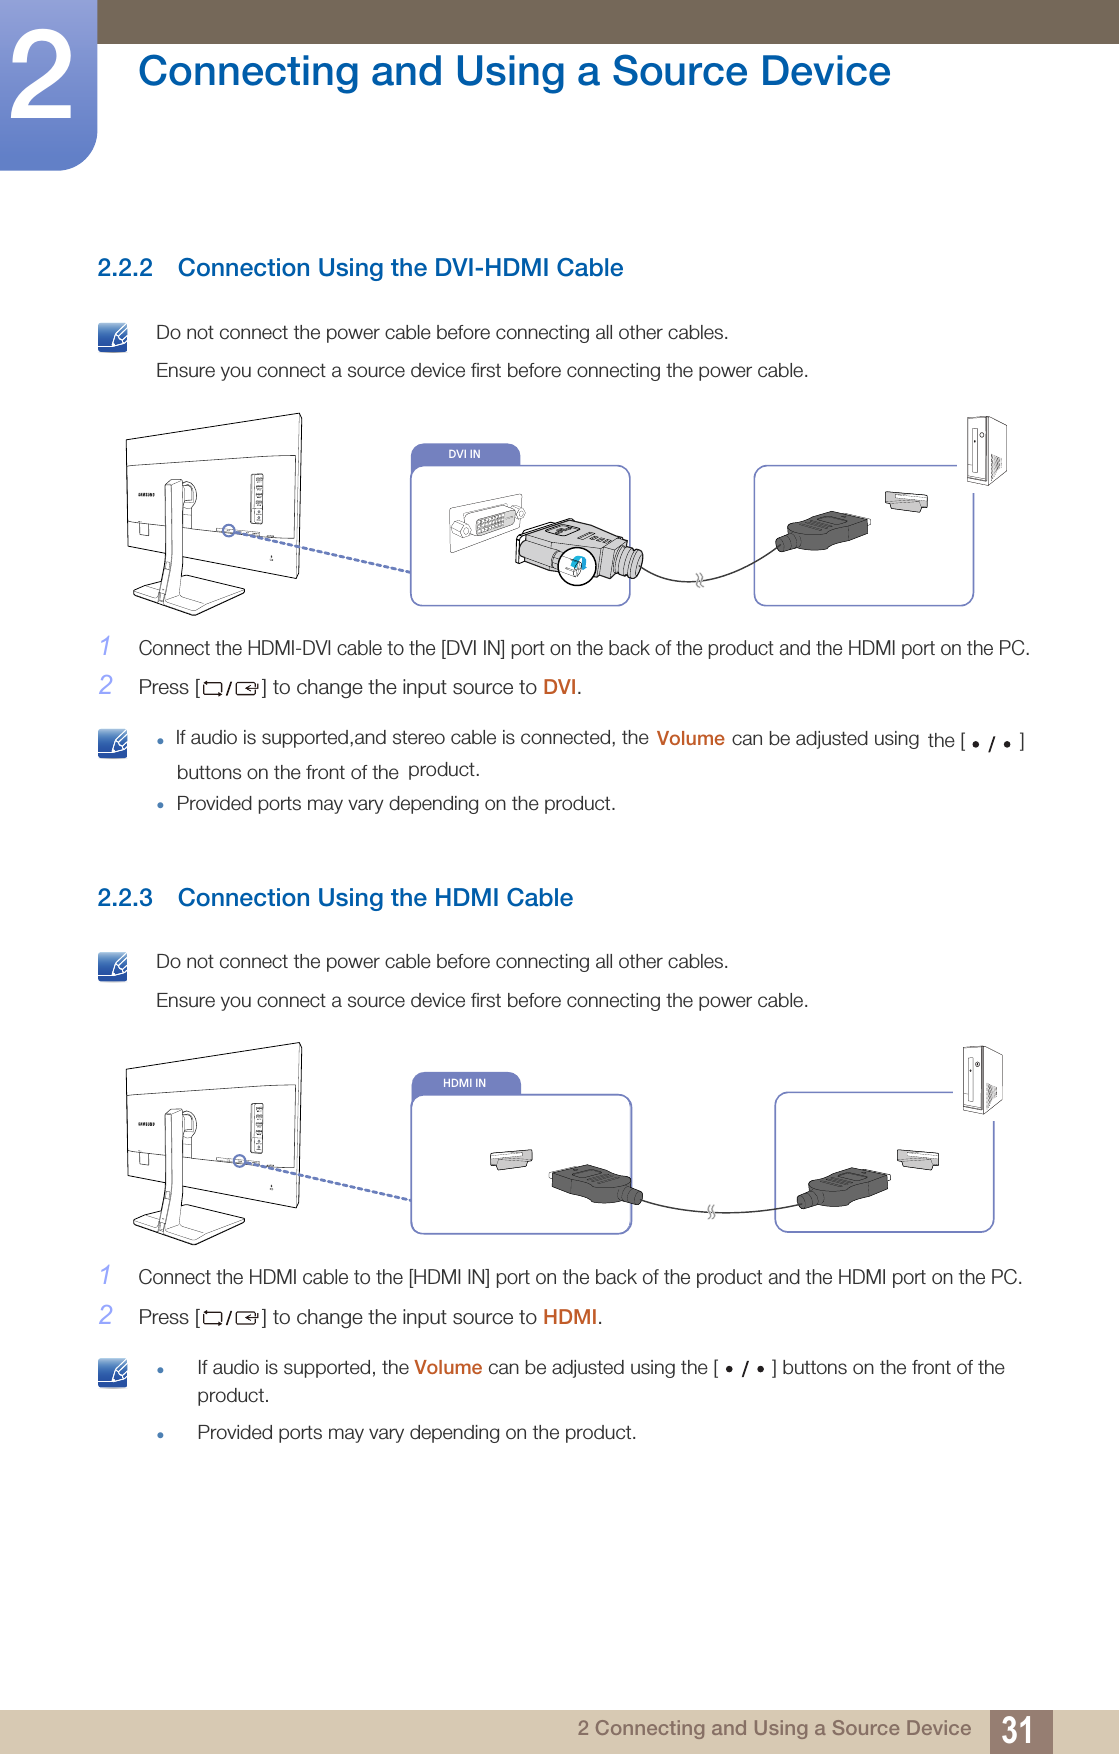 31Connecting and Using a Source Device22 Connecting and Using a Source Device2.2.2 Connection Using the DVI-HDMI Cable Do not connect the power cable before connecting all other cables. Ensure you connect a source device first before connecting the power cable. 1Connect the HDMI-DVI cable to the [DVI IN] port on the back of the product and the HDMI port on the PC.2Press [ ] to change the input source to DVI. zIf audio is supported,and stereo cable is connected, the  Volume product.zProvided ports may vary depending on the product. 2.2.3 Connection Using the HDMI Cable Do not connect the power cable before connecting all other cables. Ensure you connect a source device first before connecting the power cable. 1Connect the HDMI cable to the [HDMI IN] port on the back of the product and the HDMI port on the PC.2Press [ ] to change the input source to HDMI. zIf audio is supported, the Volume can be adjusted using the [ ] buttons on the front of the product.zProvided ports may vary depending on the product. DVI INDVI INHDMI INcan be adjusted using  the [          ] buttons on the front of the 